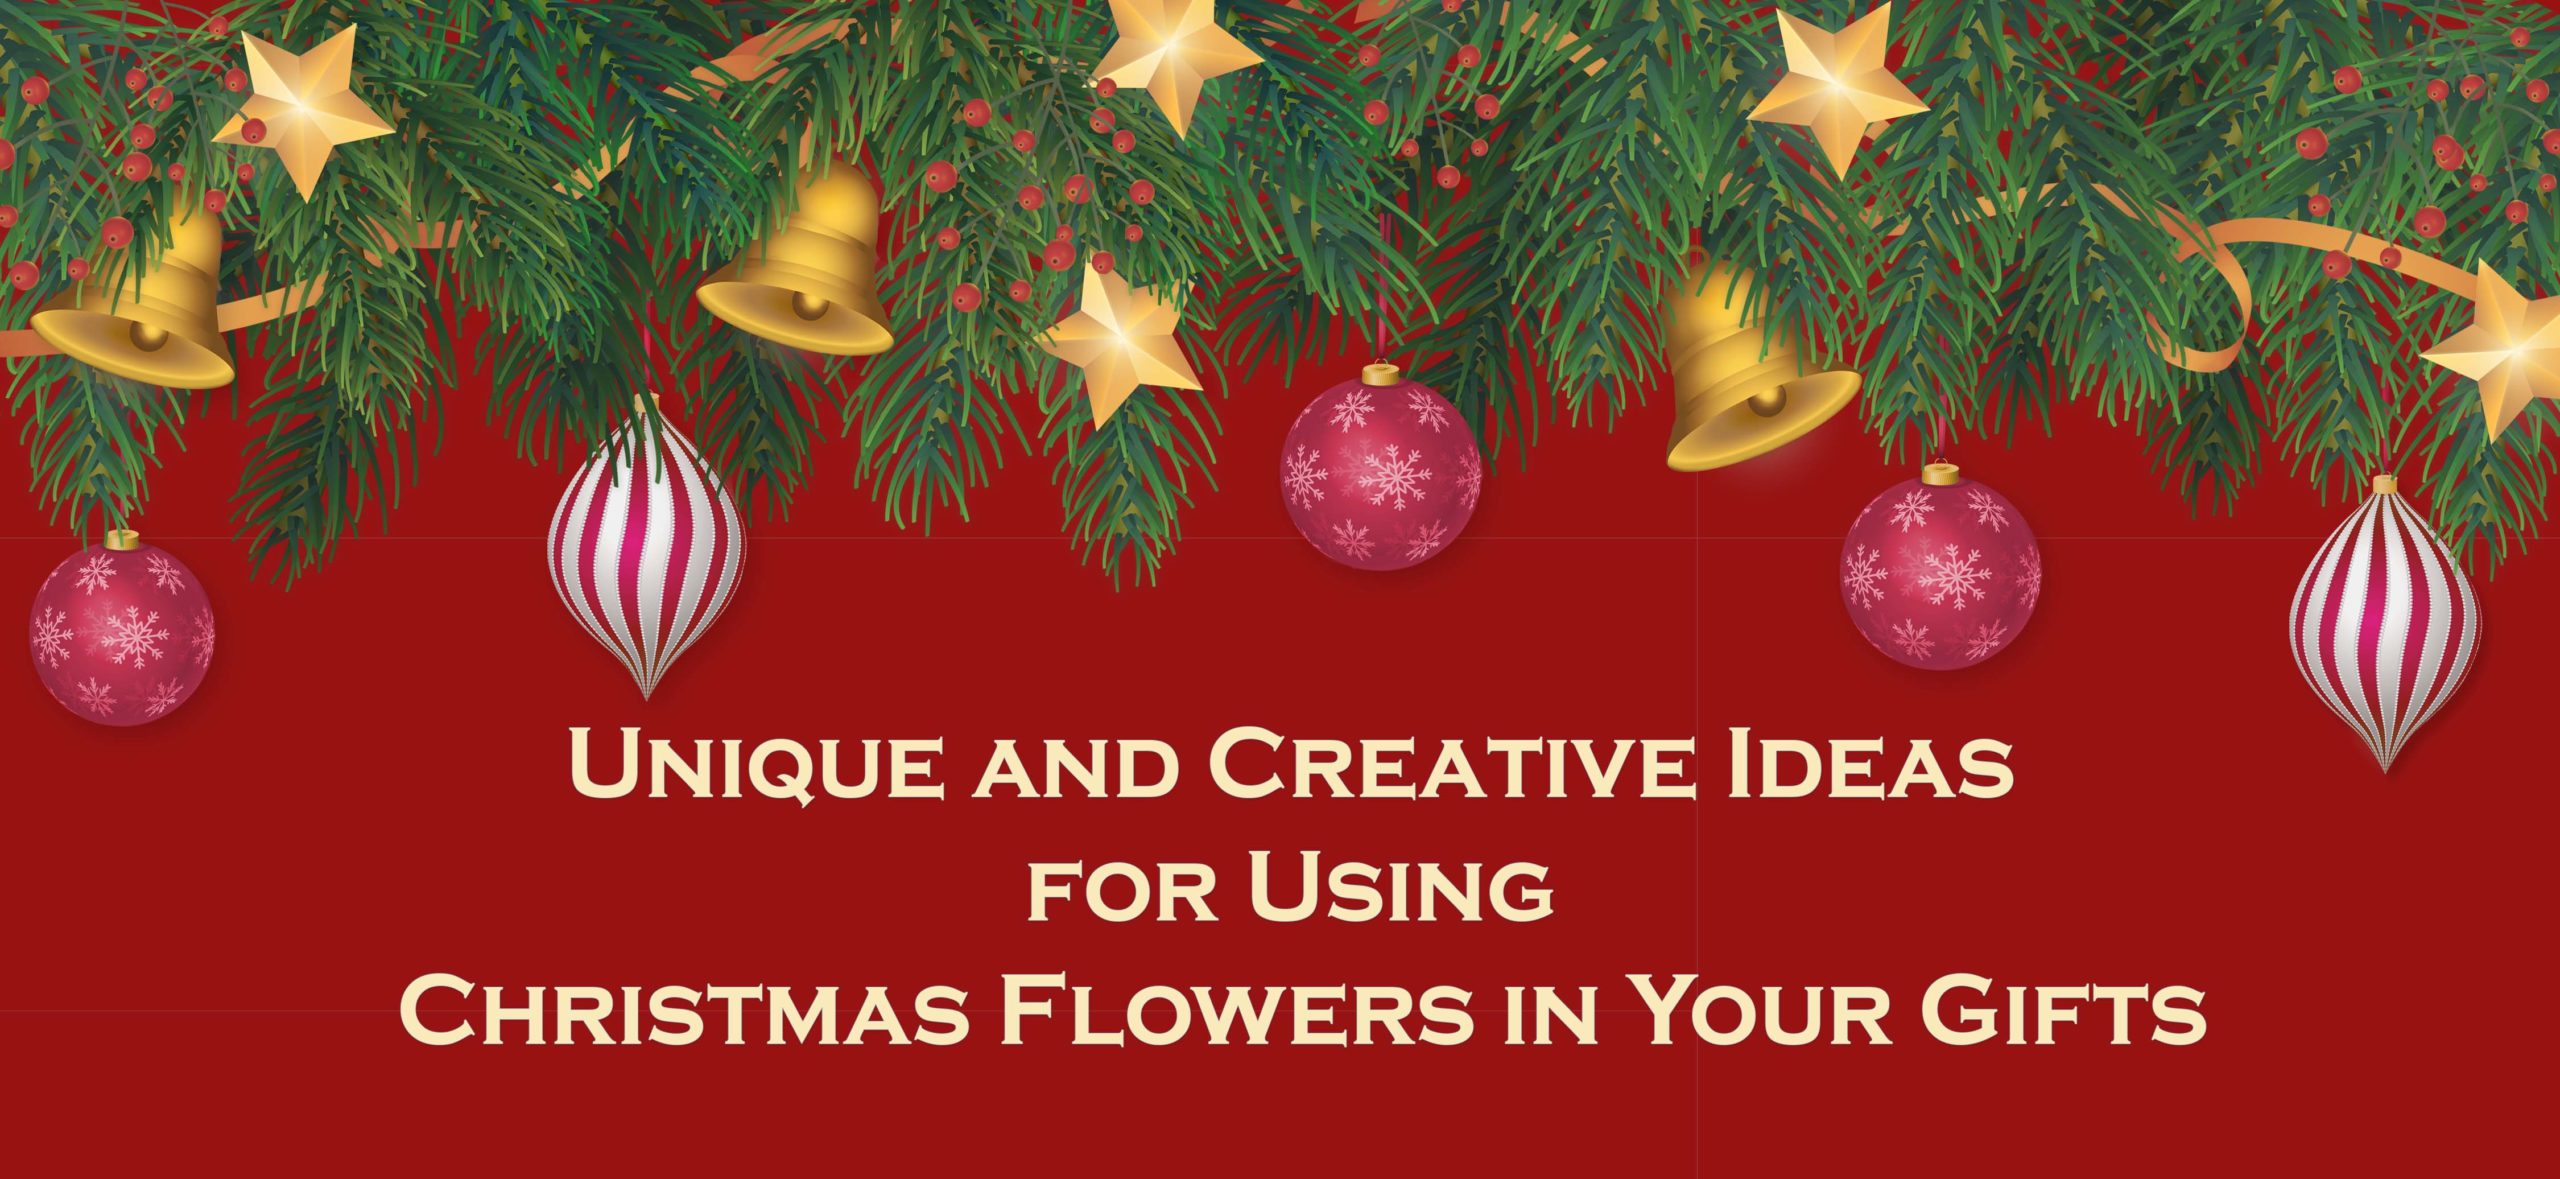 Christmas gifts and flowers ideas